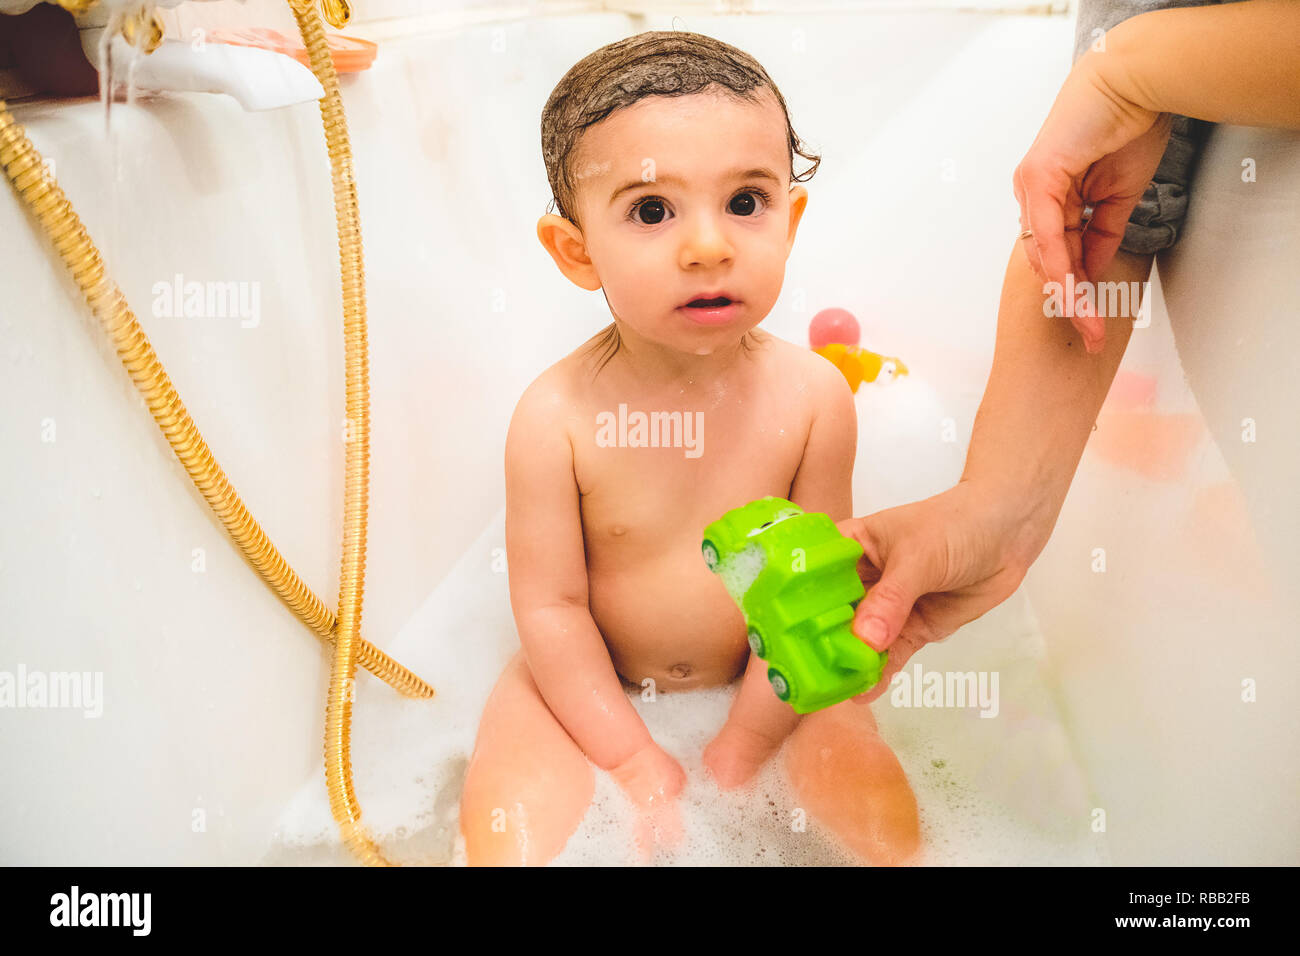 little baby child bathe play with toys in bath tub Stock Photo